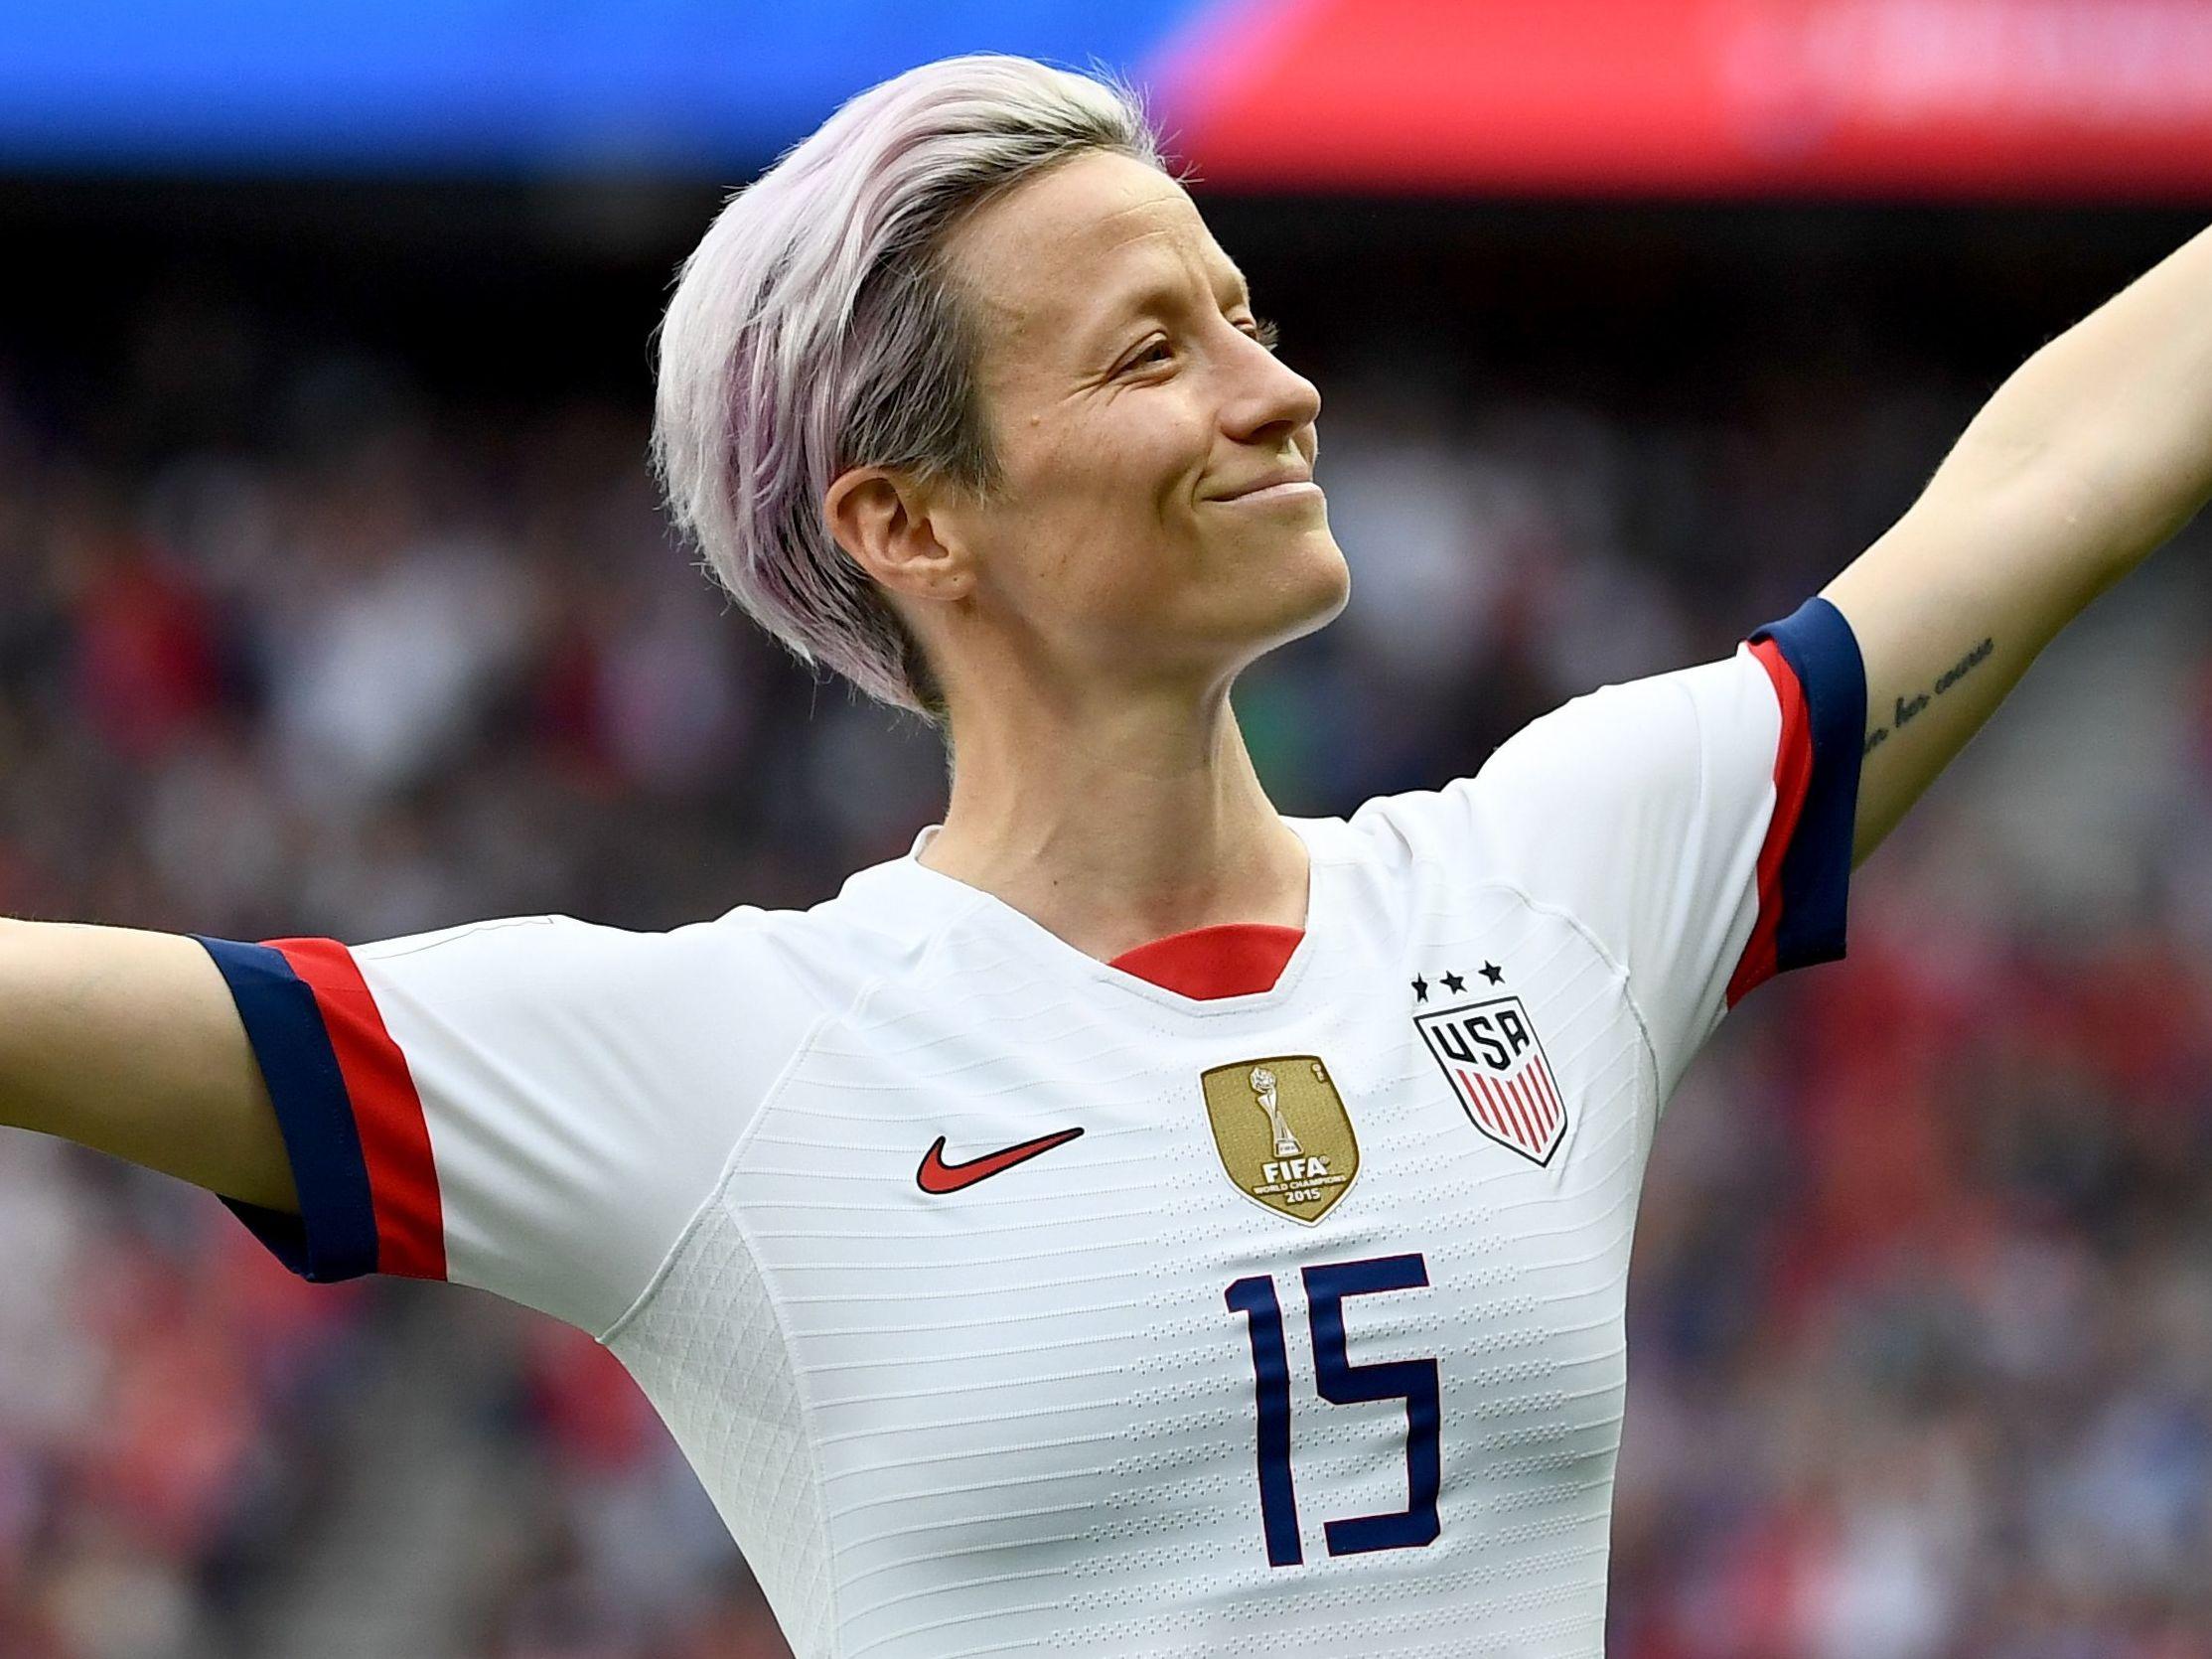 Fresh Air Weekend Soccer Star Megan Rapinoe The Science Of Smell Wcbe 905 Fm 